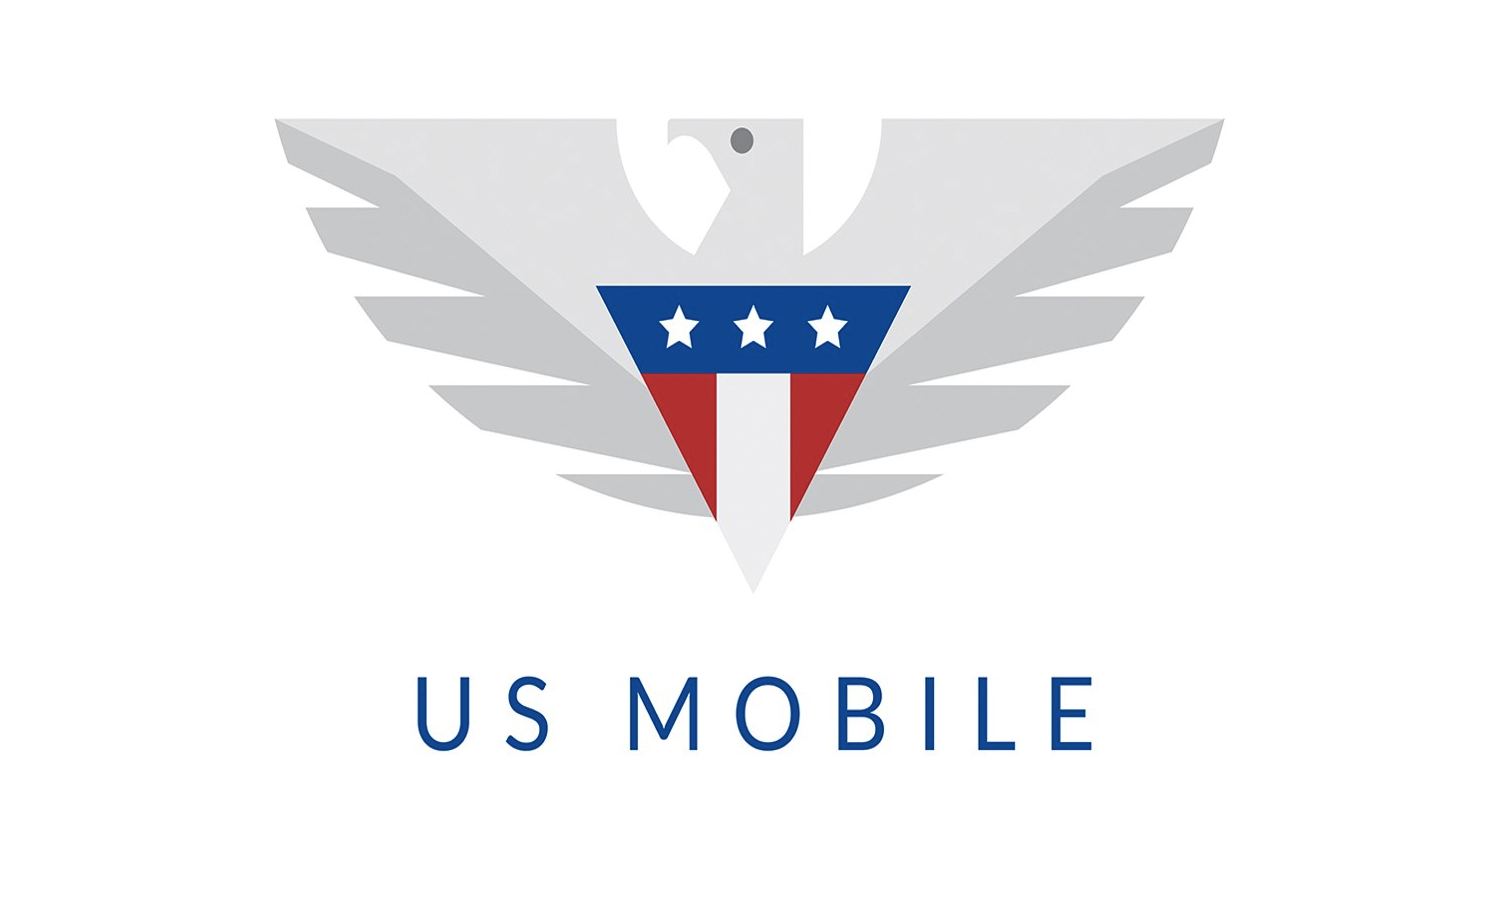 The US Mobile logo